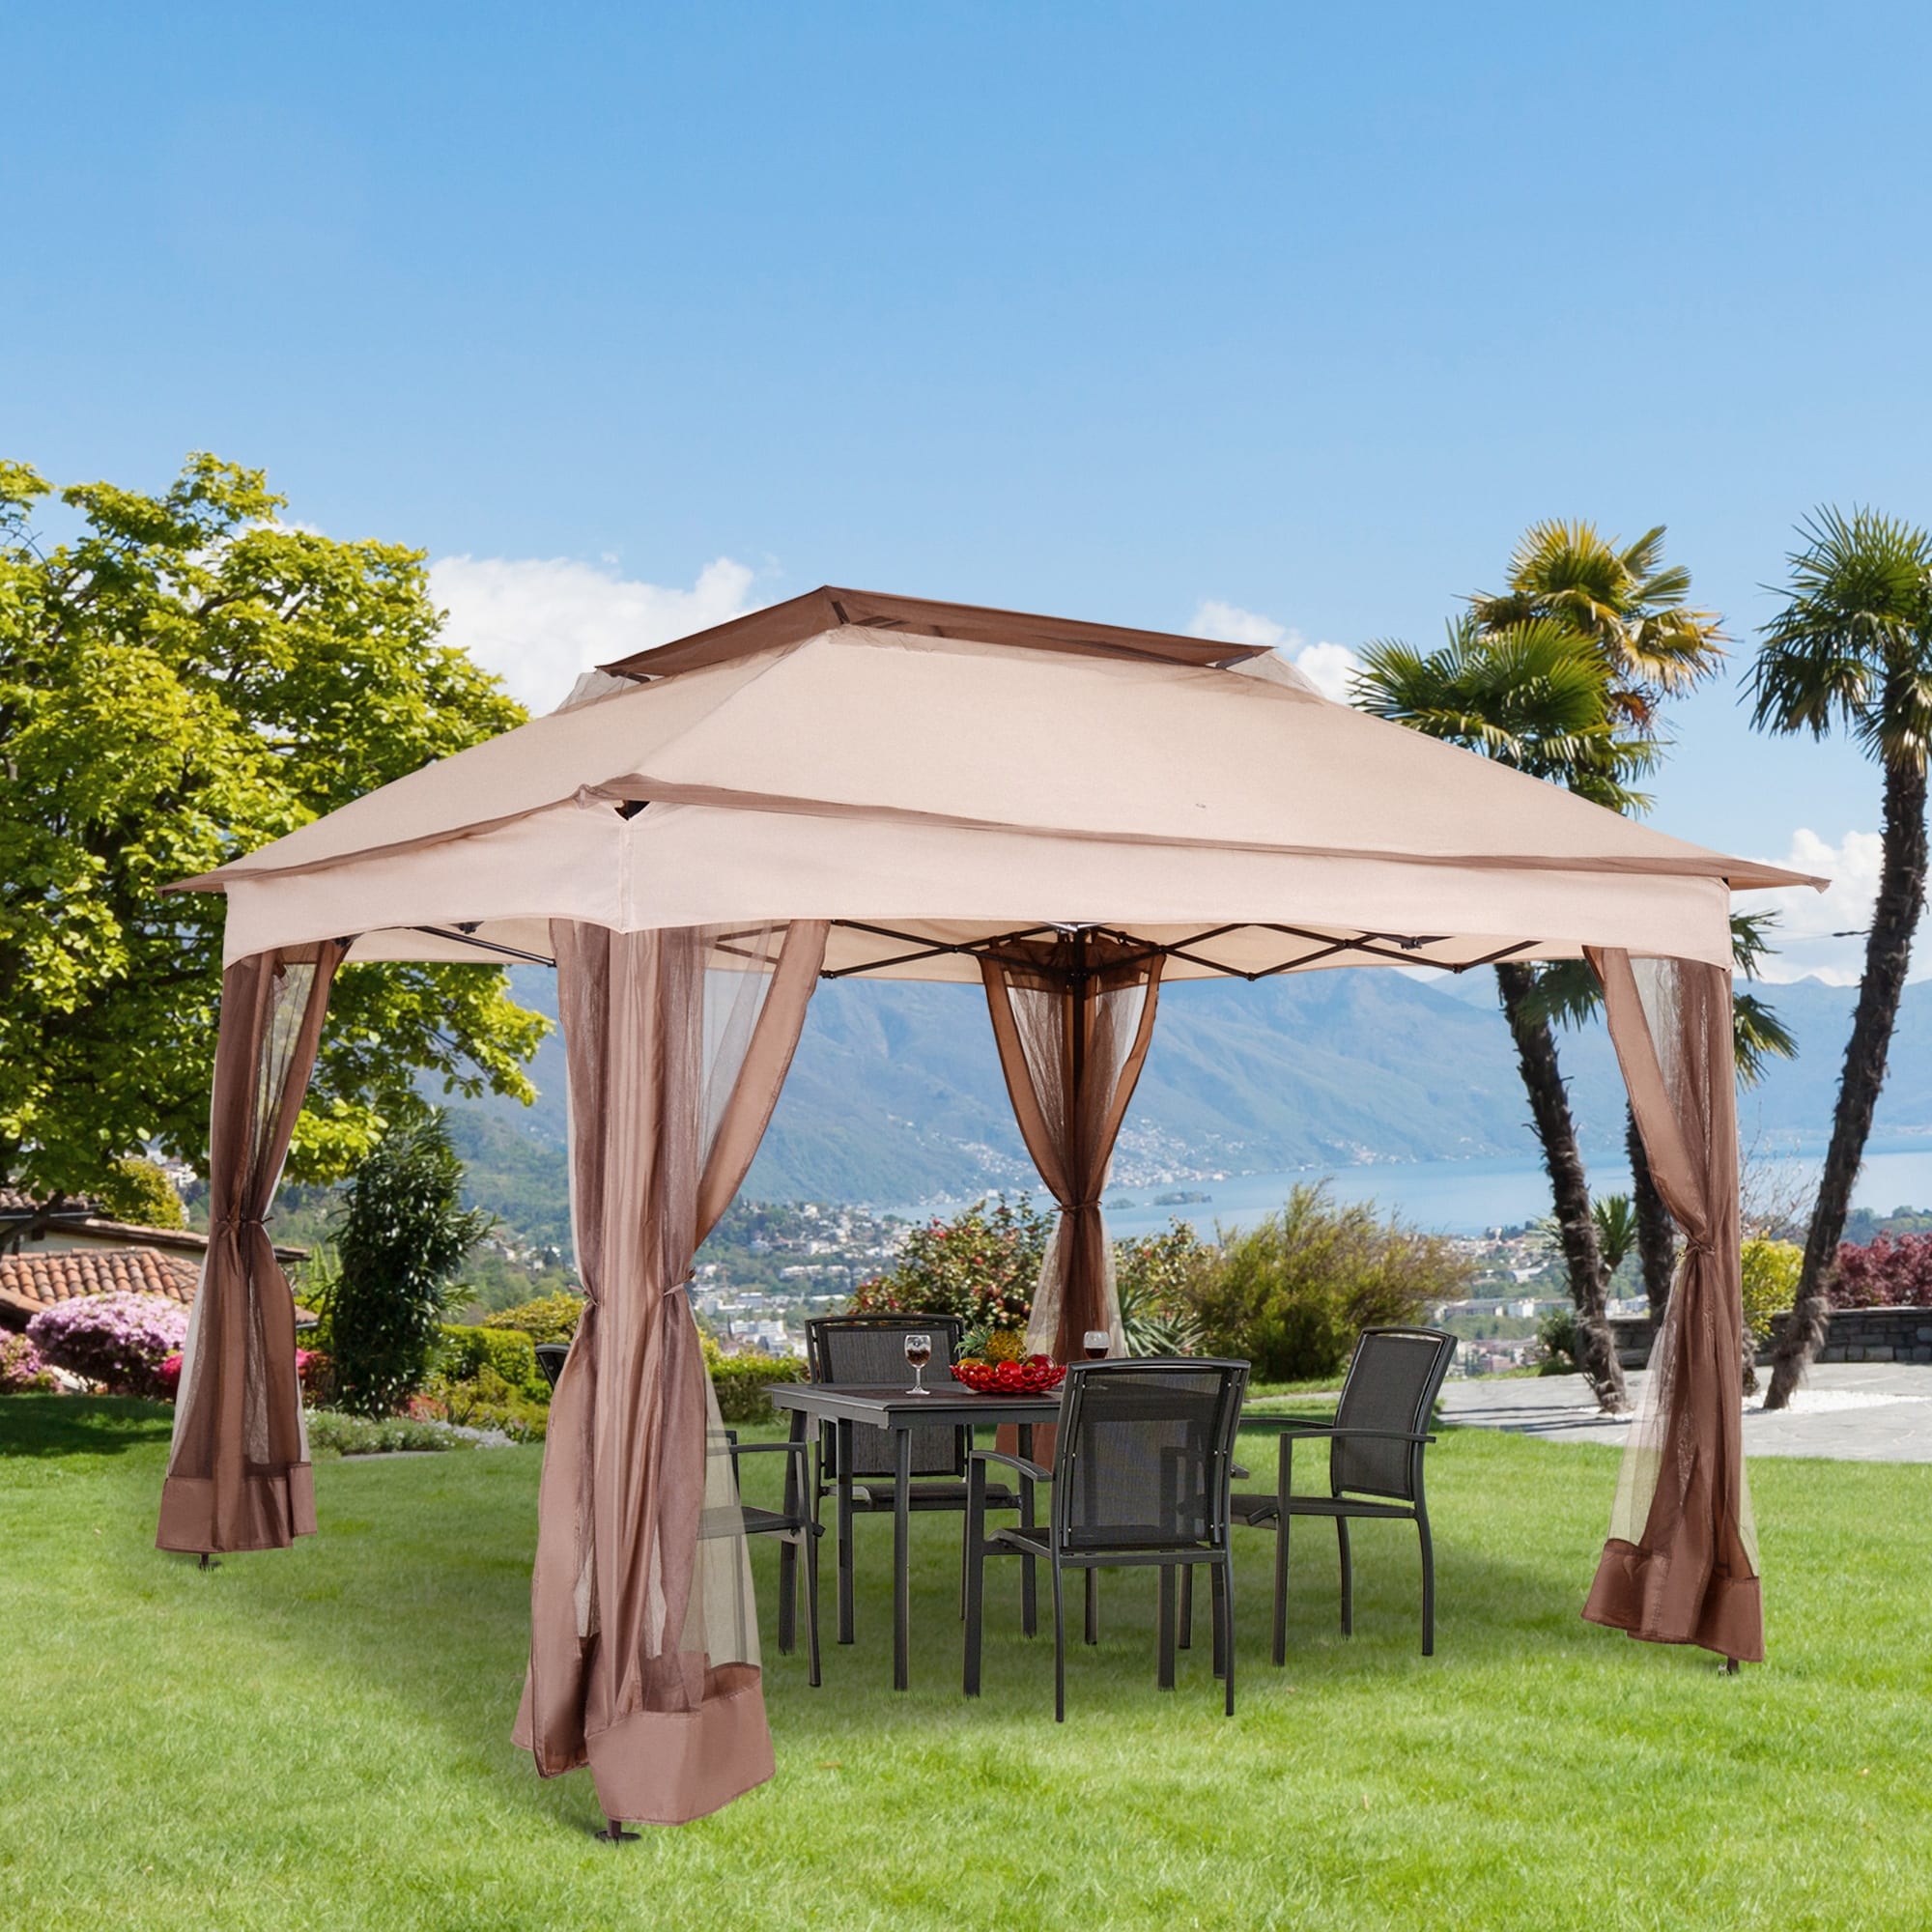 Outsunny 11' x 11' Pop Up Gazebo Canopy with 2-Tier Soft Top, and Removable  Zipper Netting, Event Tent with Storage Bag On Sale Bed Bath  Beyond  23056365